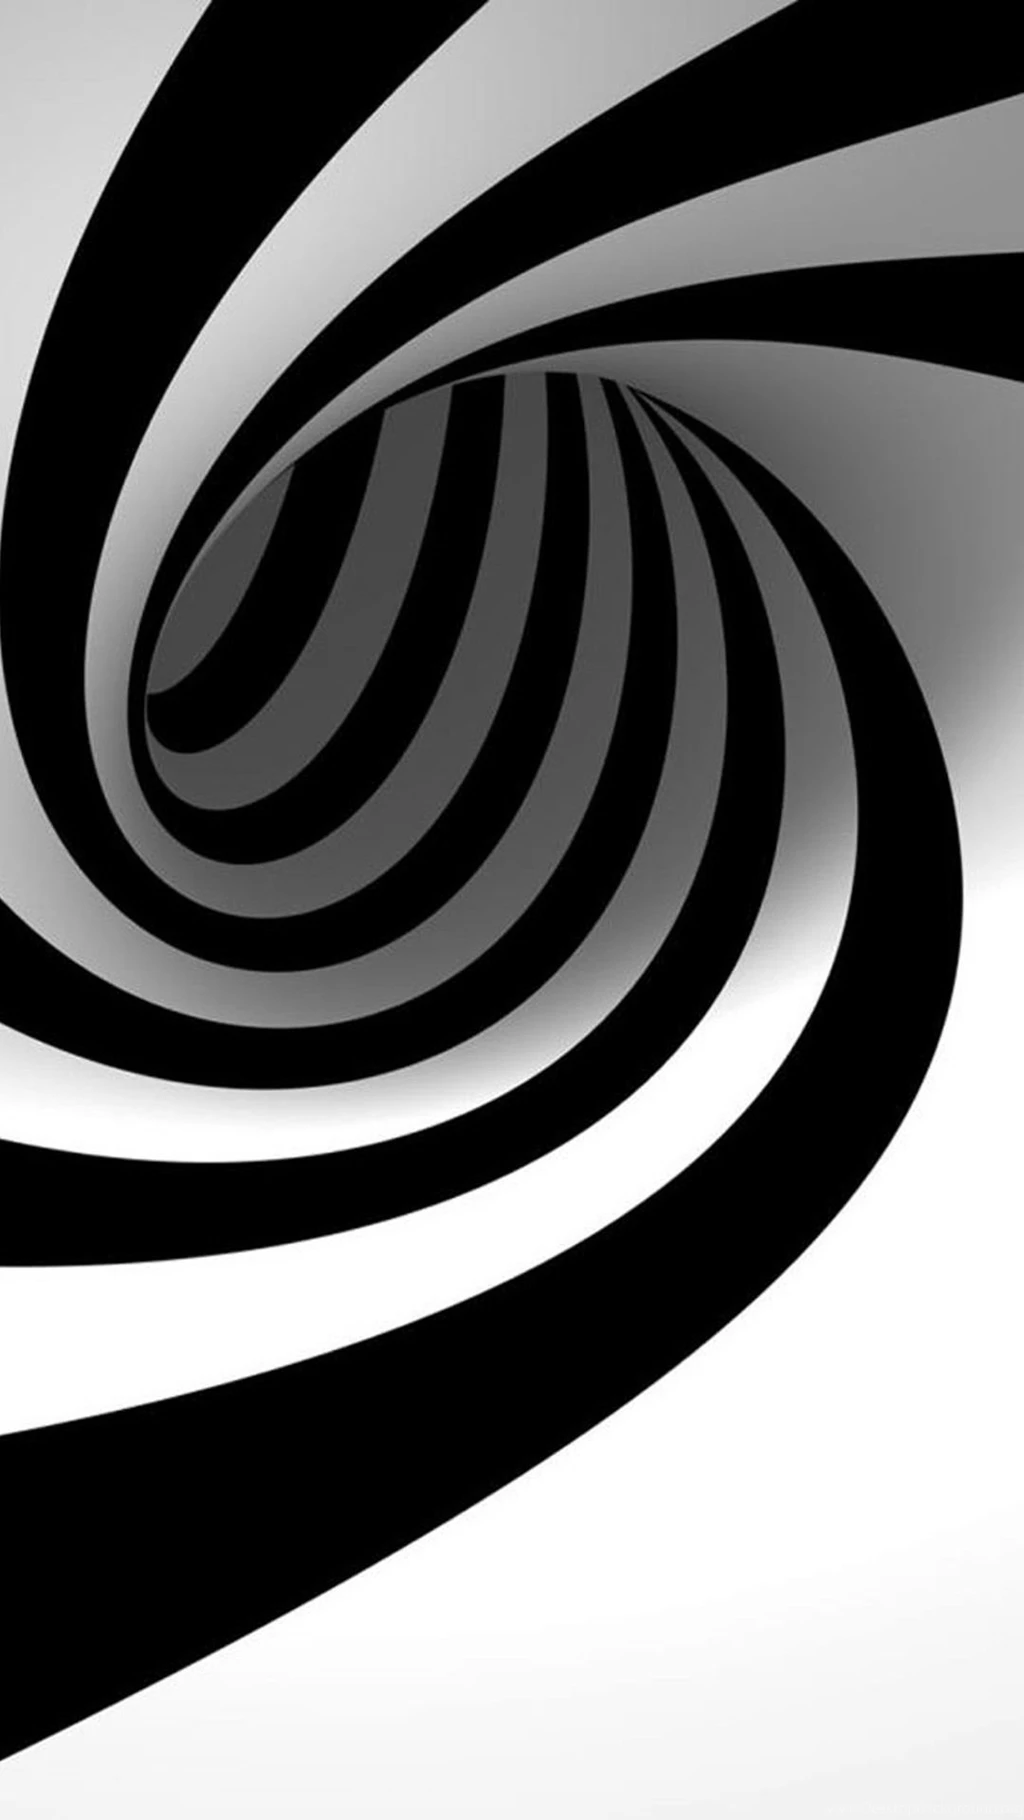 3D Black And White Swirl IPhone 6 Wallpapers Download Desktop Background